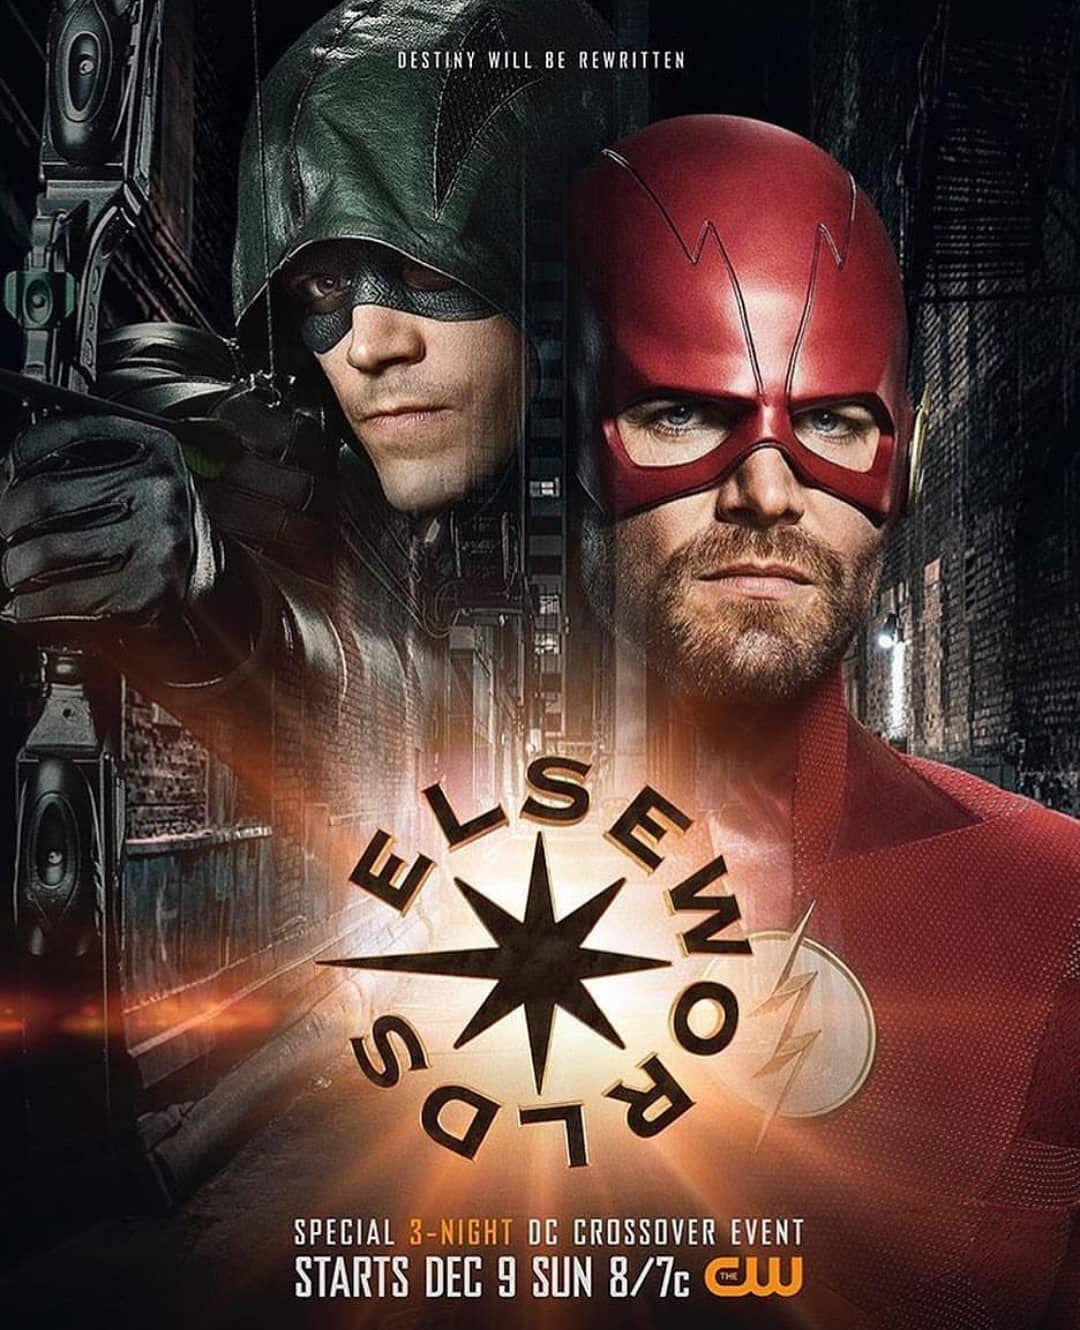 Here is the official poster for the 3 night arrowverse crossover